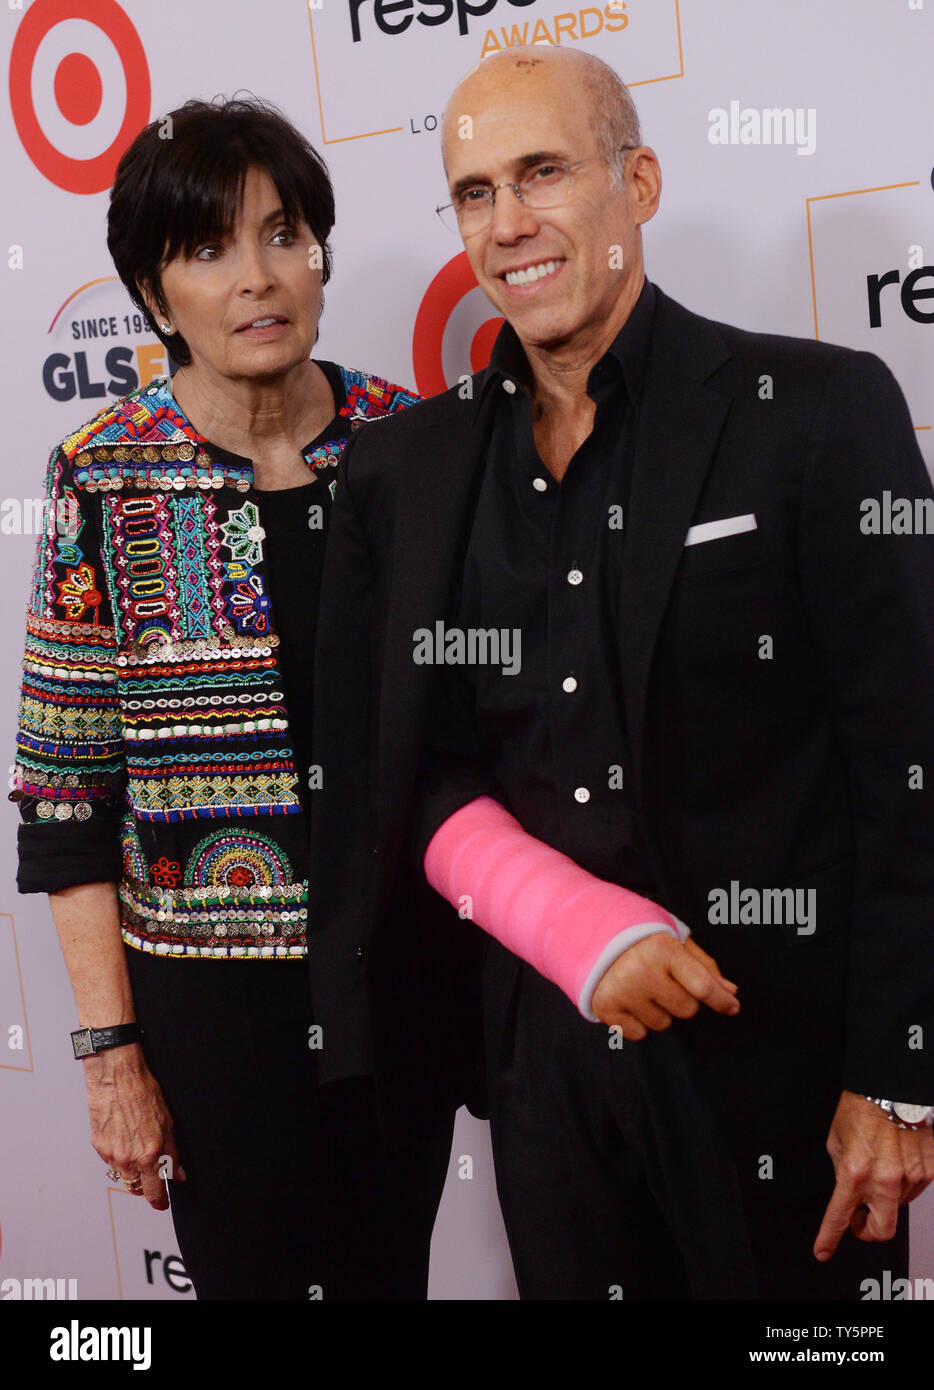 Producer Jeffrey Katzenberg and his wife Marilyn attend the GLSEN Respect Awards at the Beverly Wilshire Four Seasons Hotel in Beverly Hills, California on October 23, 2015.  Photo by Jim Ruymen/UPI. Stock Photo